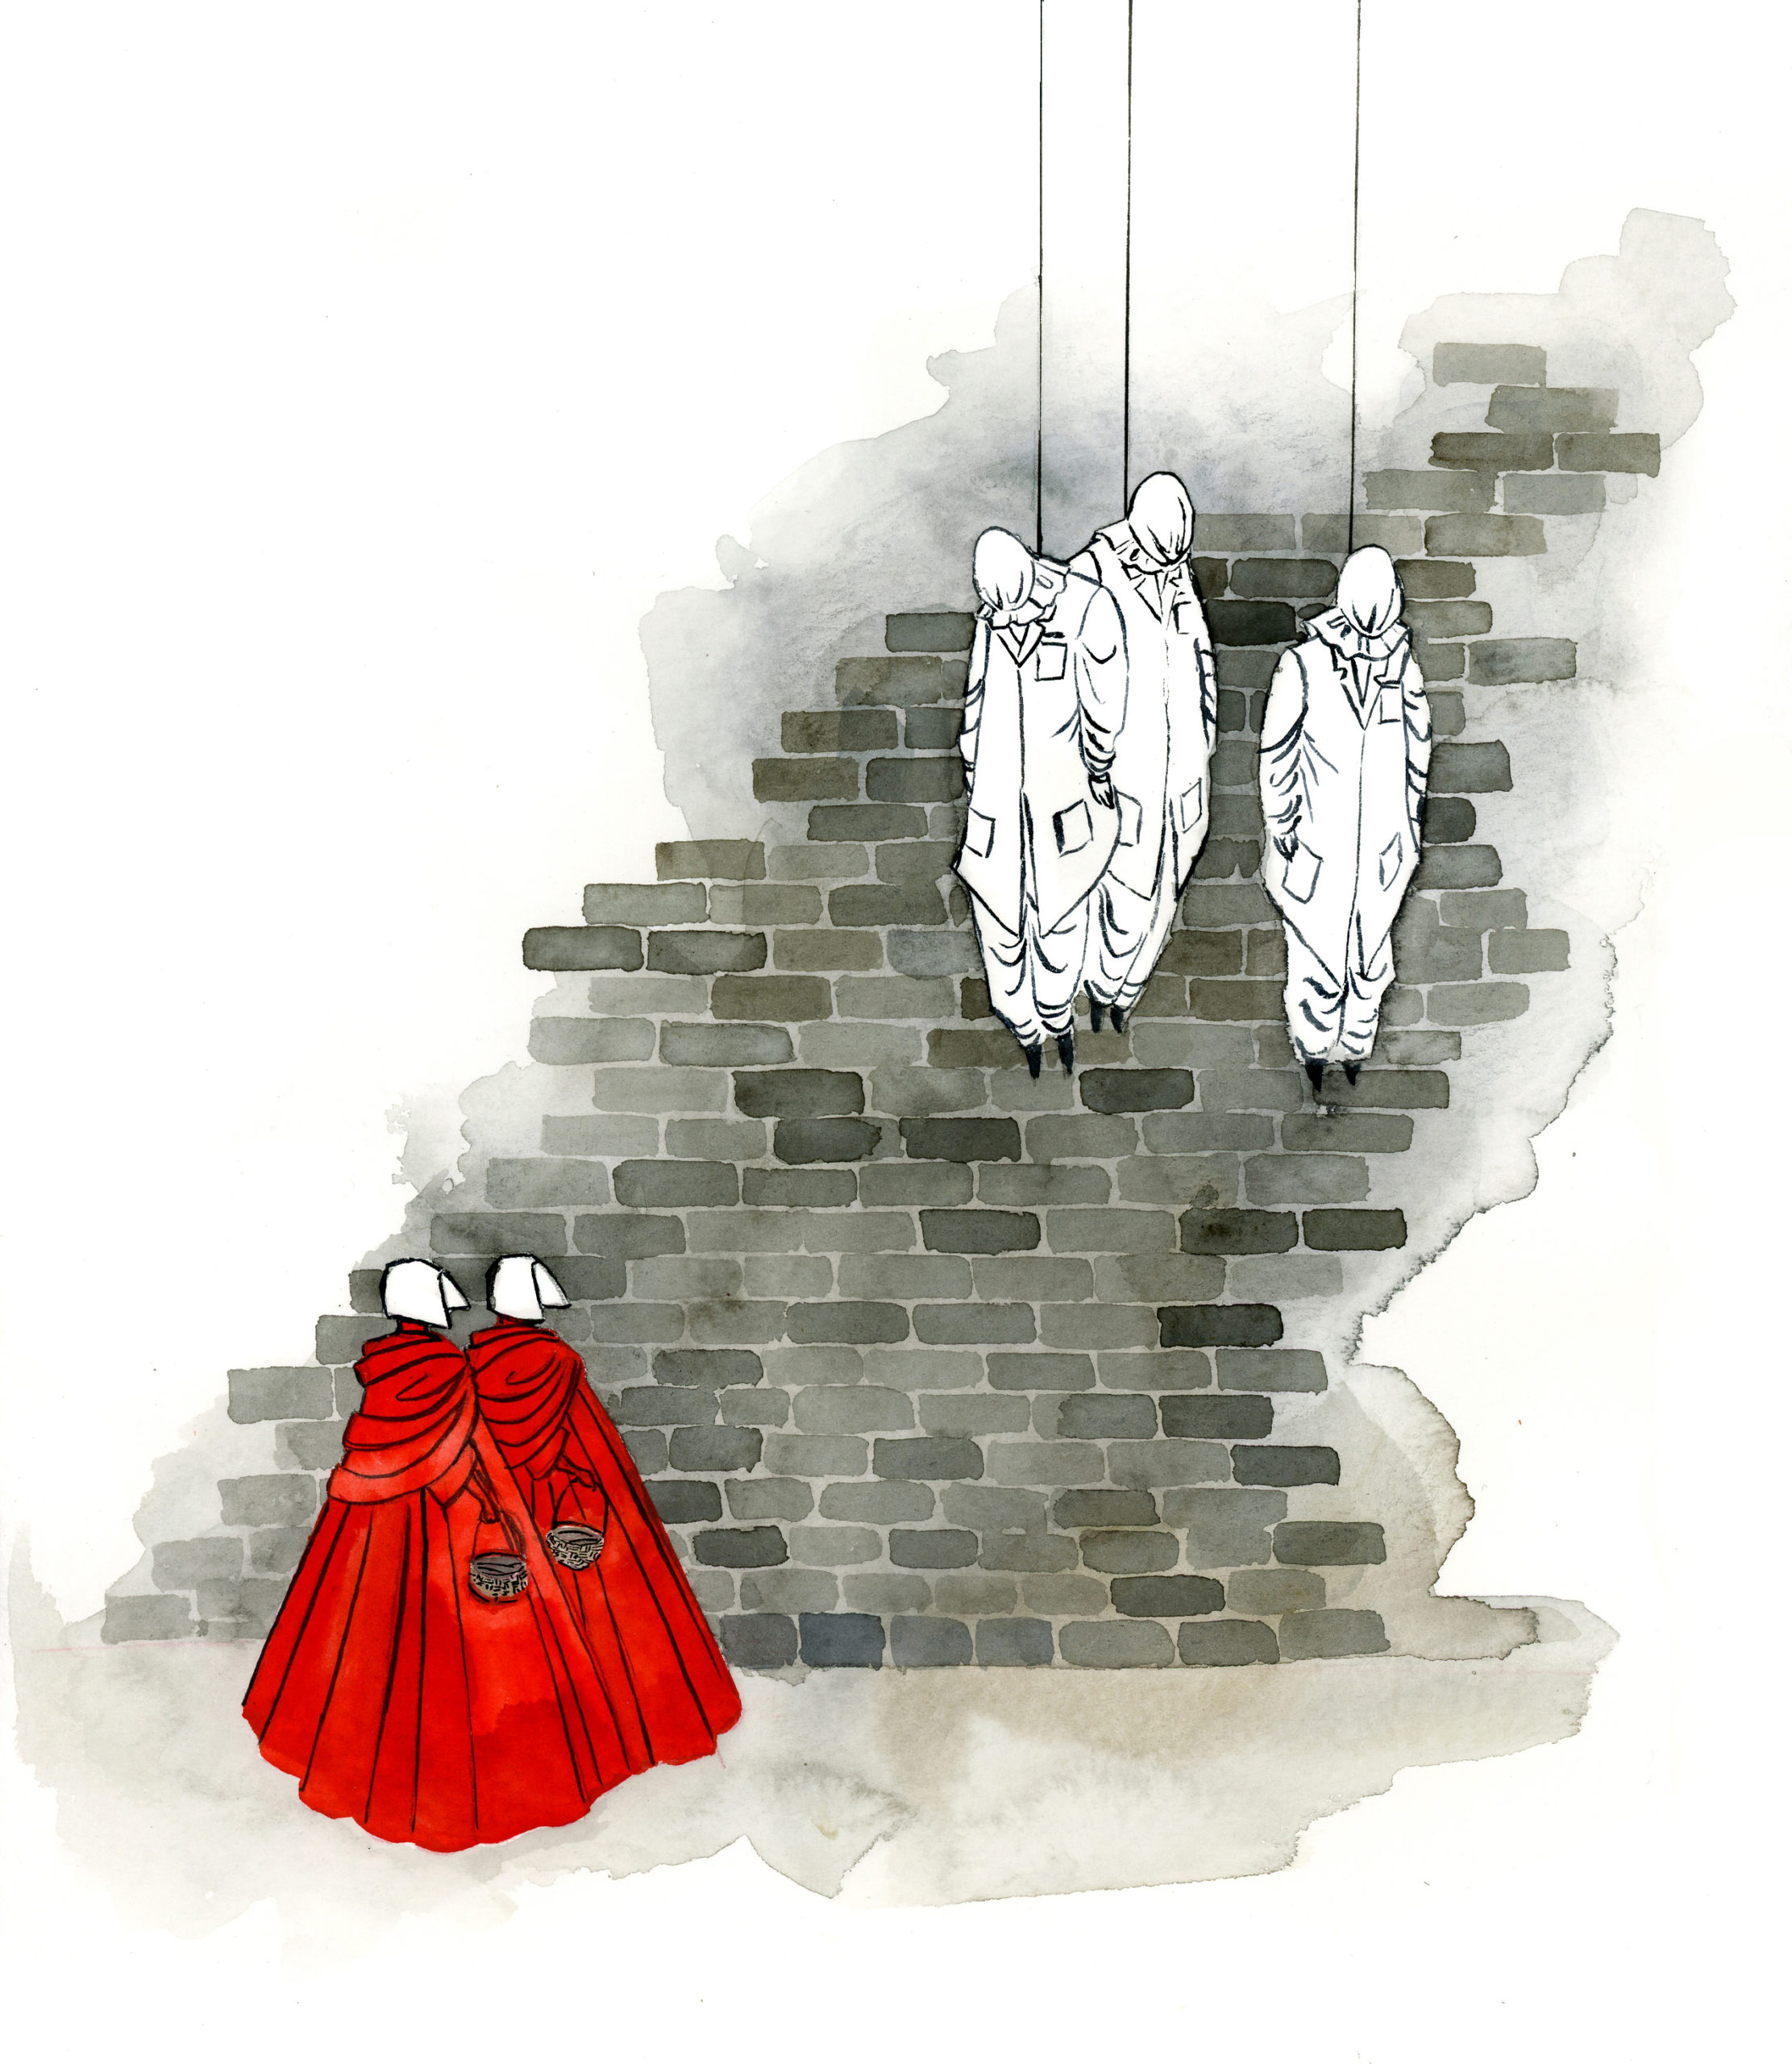 Report: The Handmaid’s Tale Graphic Novel Is Coming